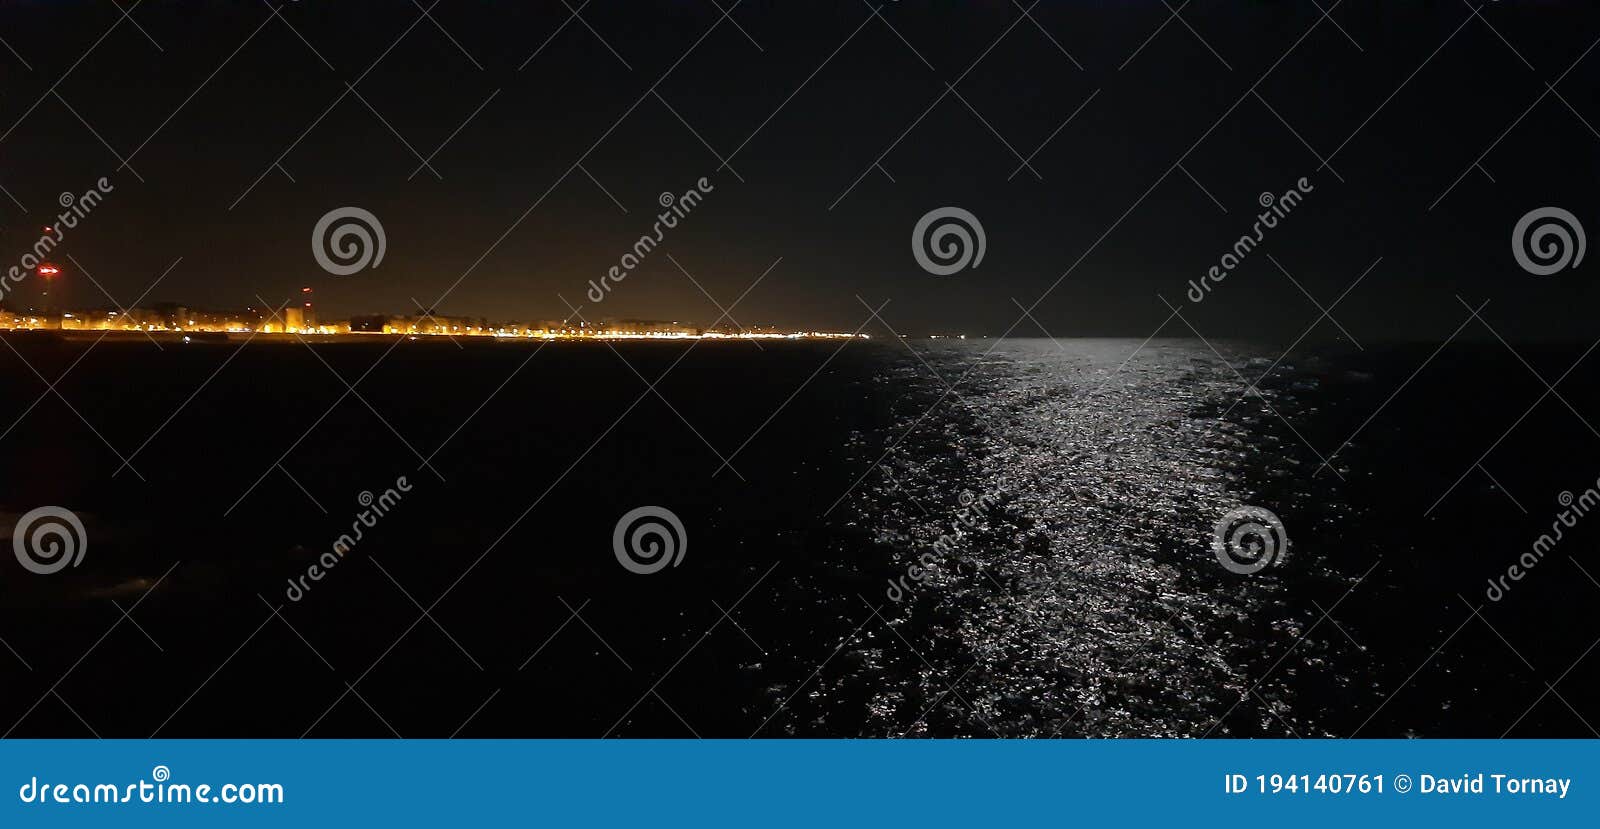 night photography of the city of cÃÂ¡diz